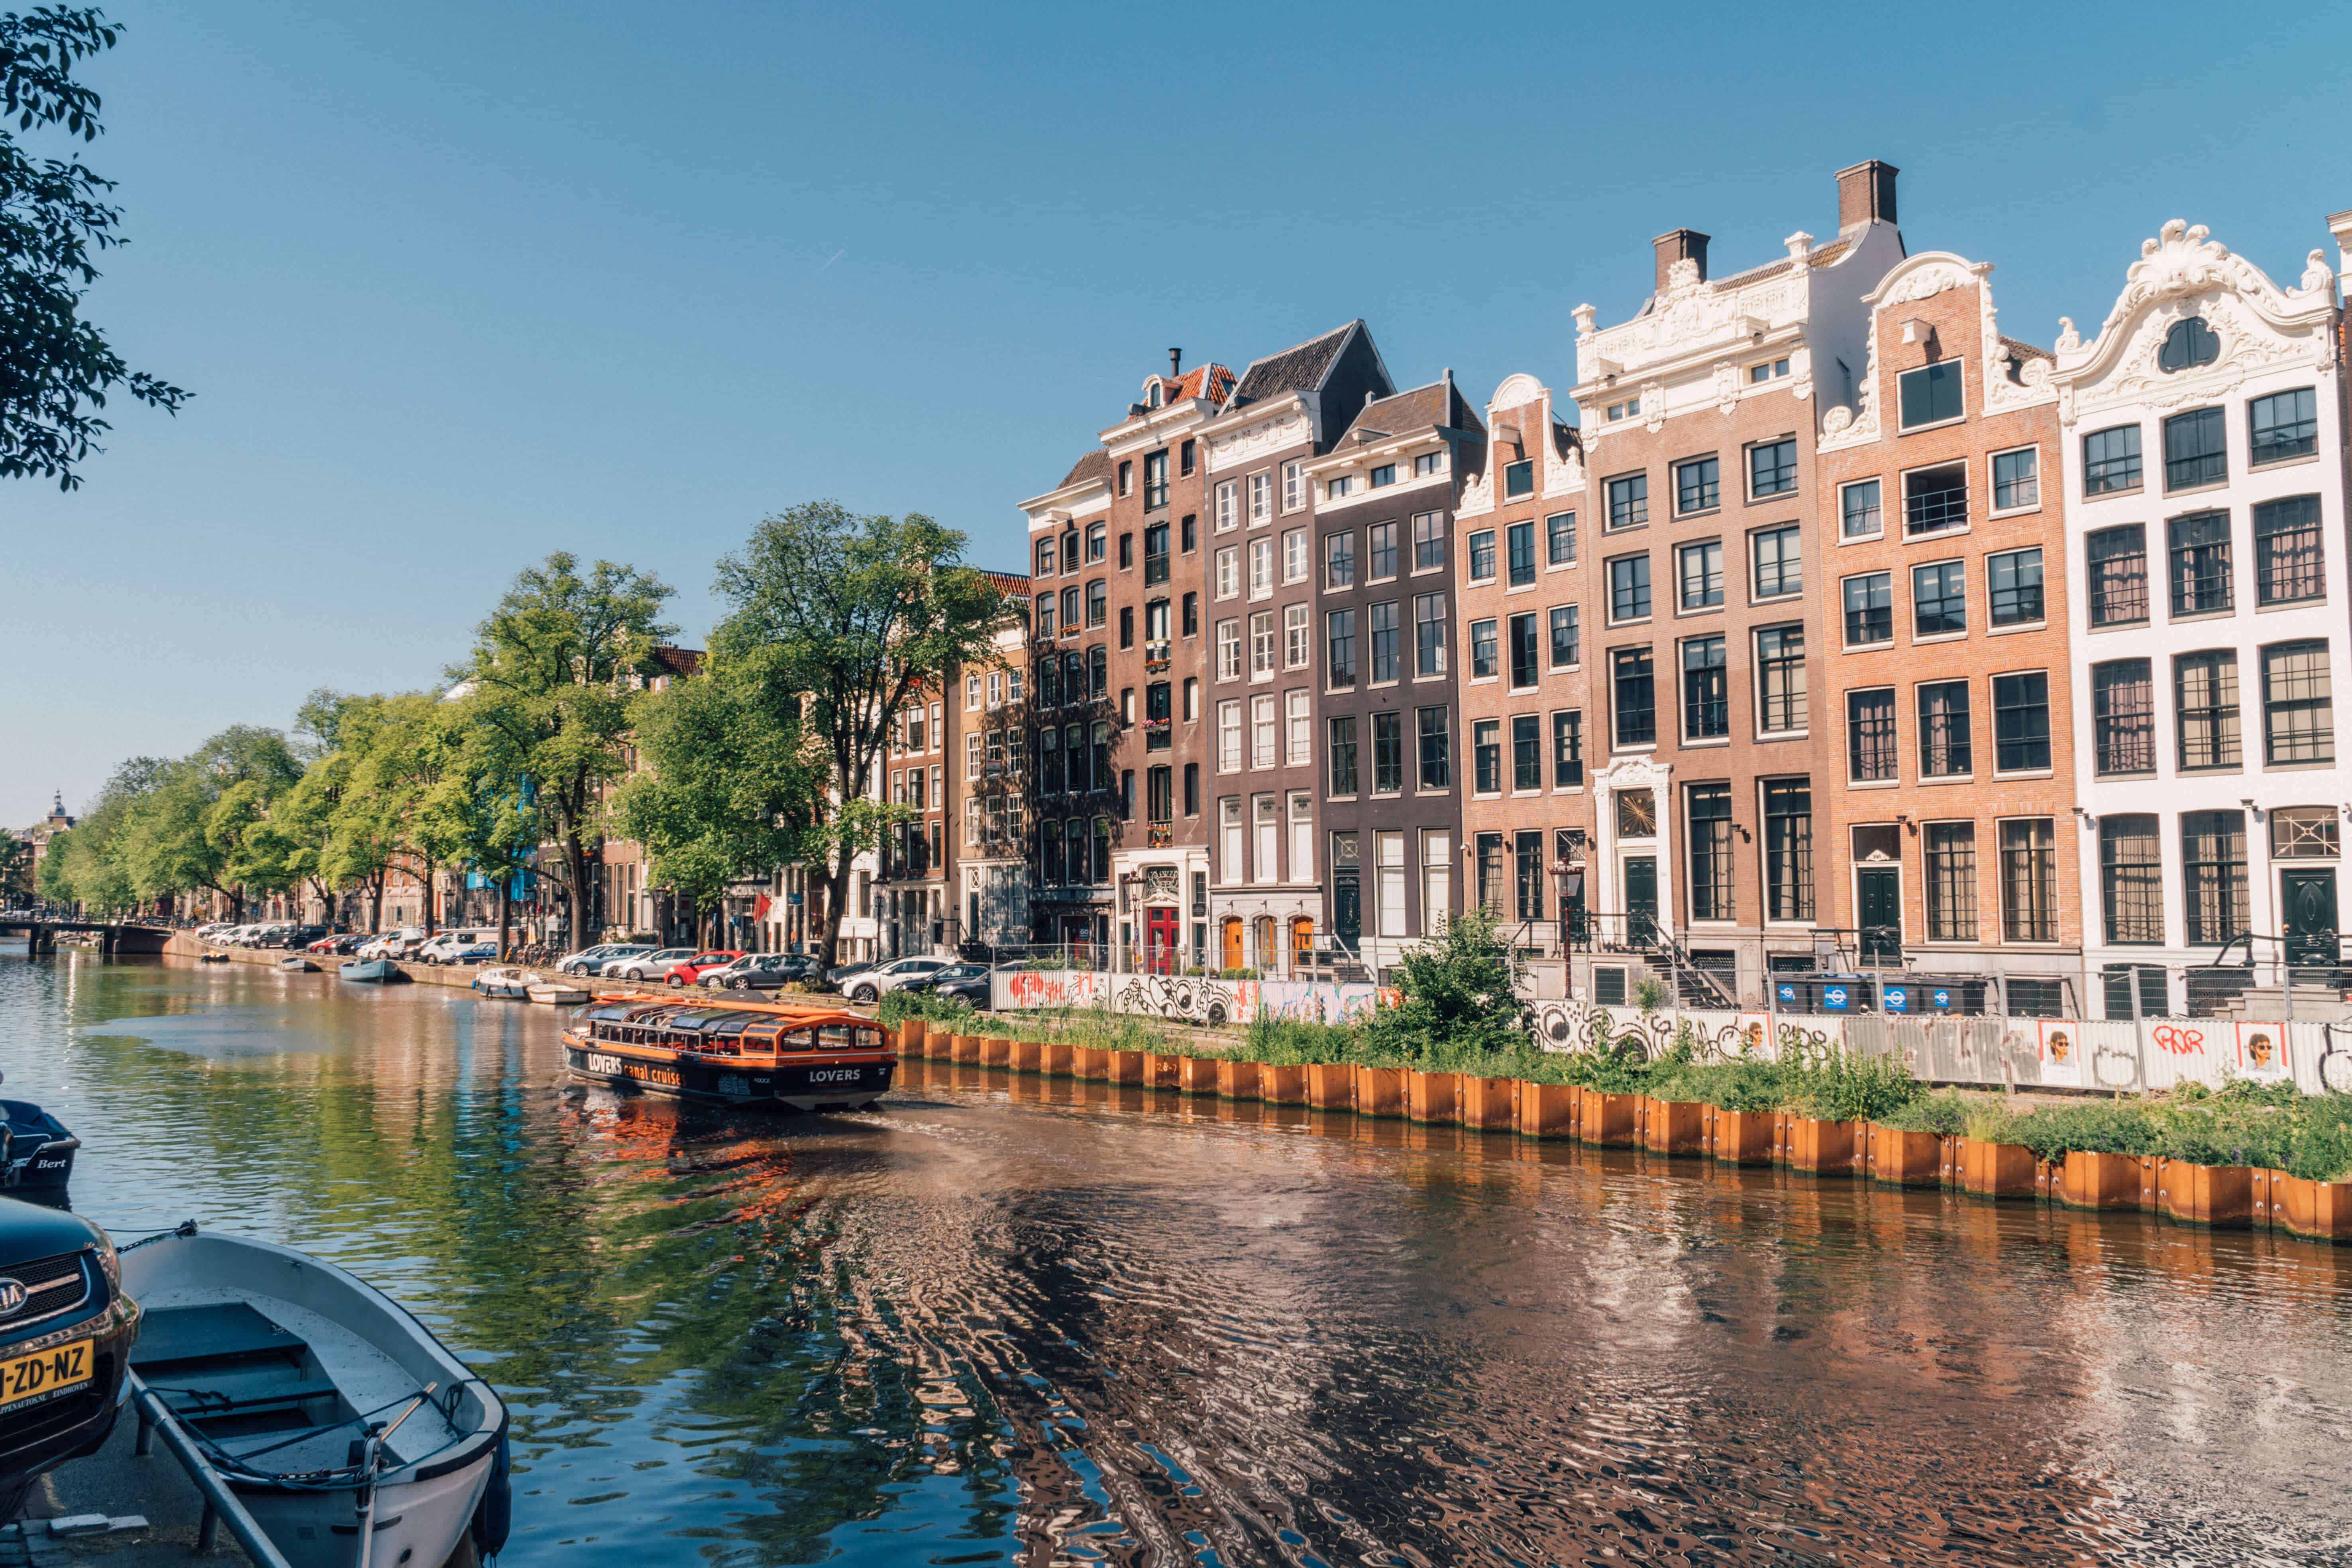 View of the canal | HOW TO EXPLORE AMSTERDAM BY BOAT | The Republic of Rose